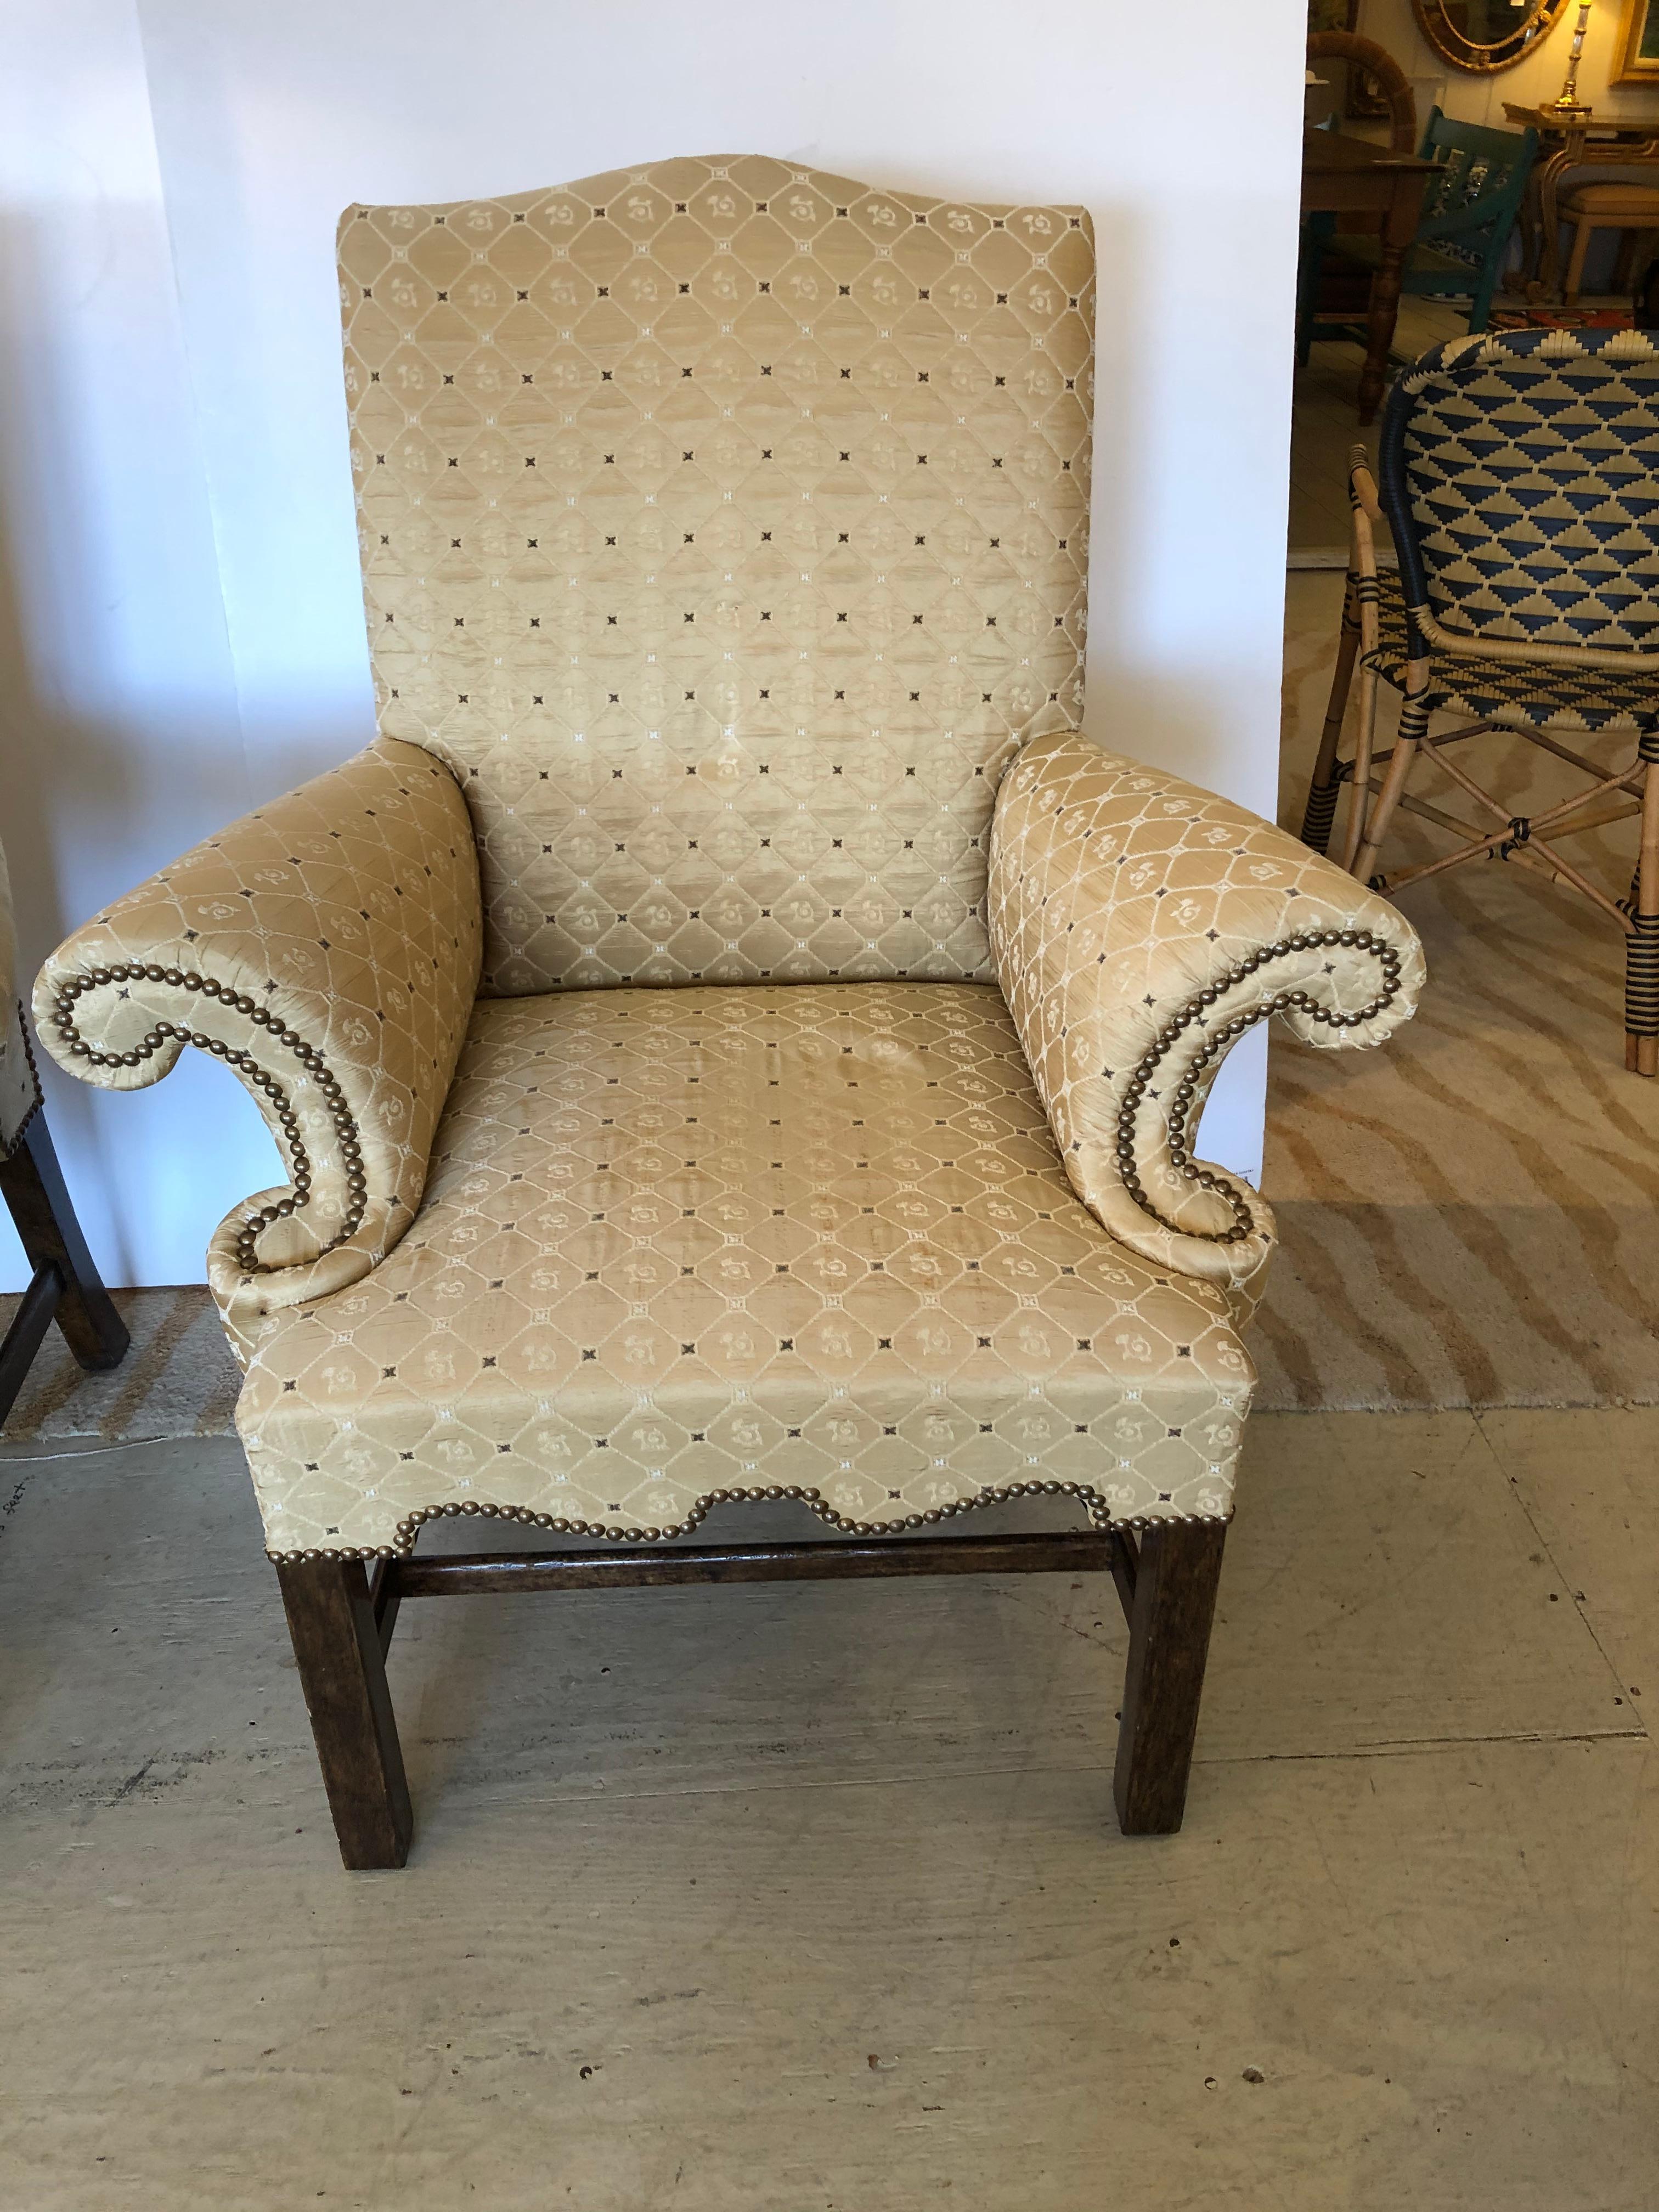 A wonderfully shaped pair of upholstered club or host chairs having dramatic scrolled arms and scalloped decorative apron on Chippendale style straight mahogany legs. Sumptuous gold satiny patterned fabric, unfortunately with one rip on an arm,